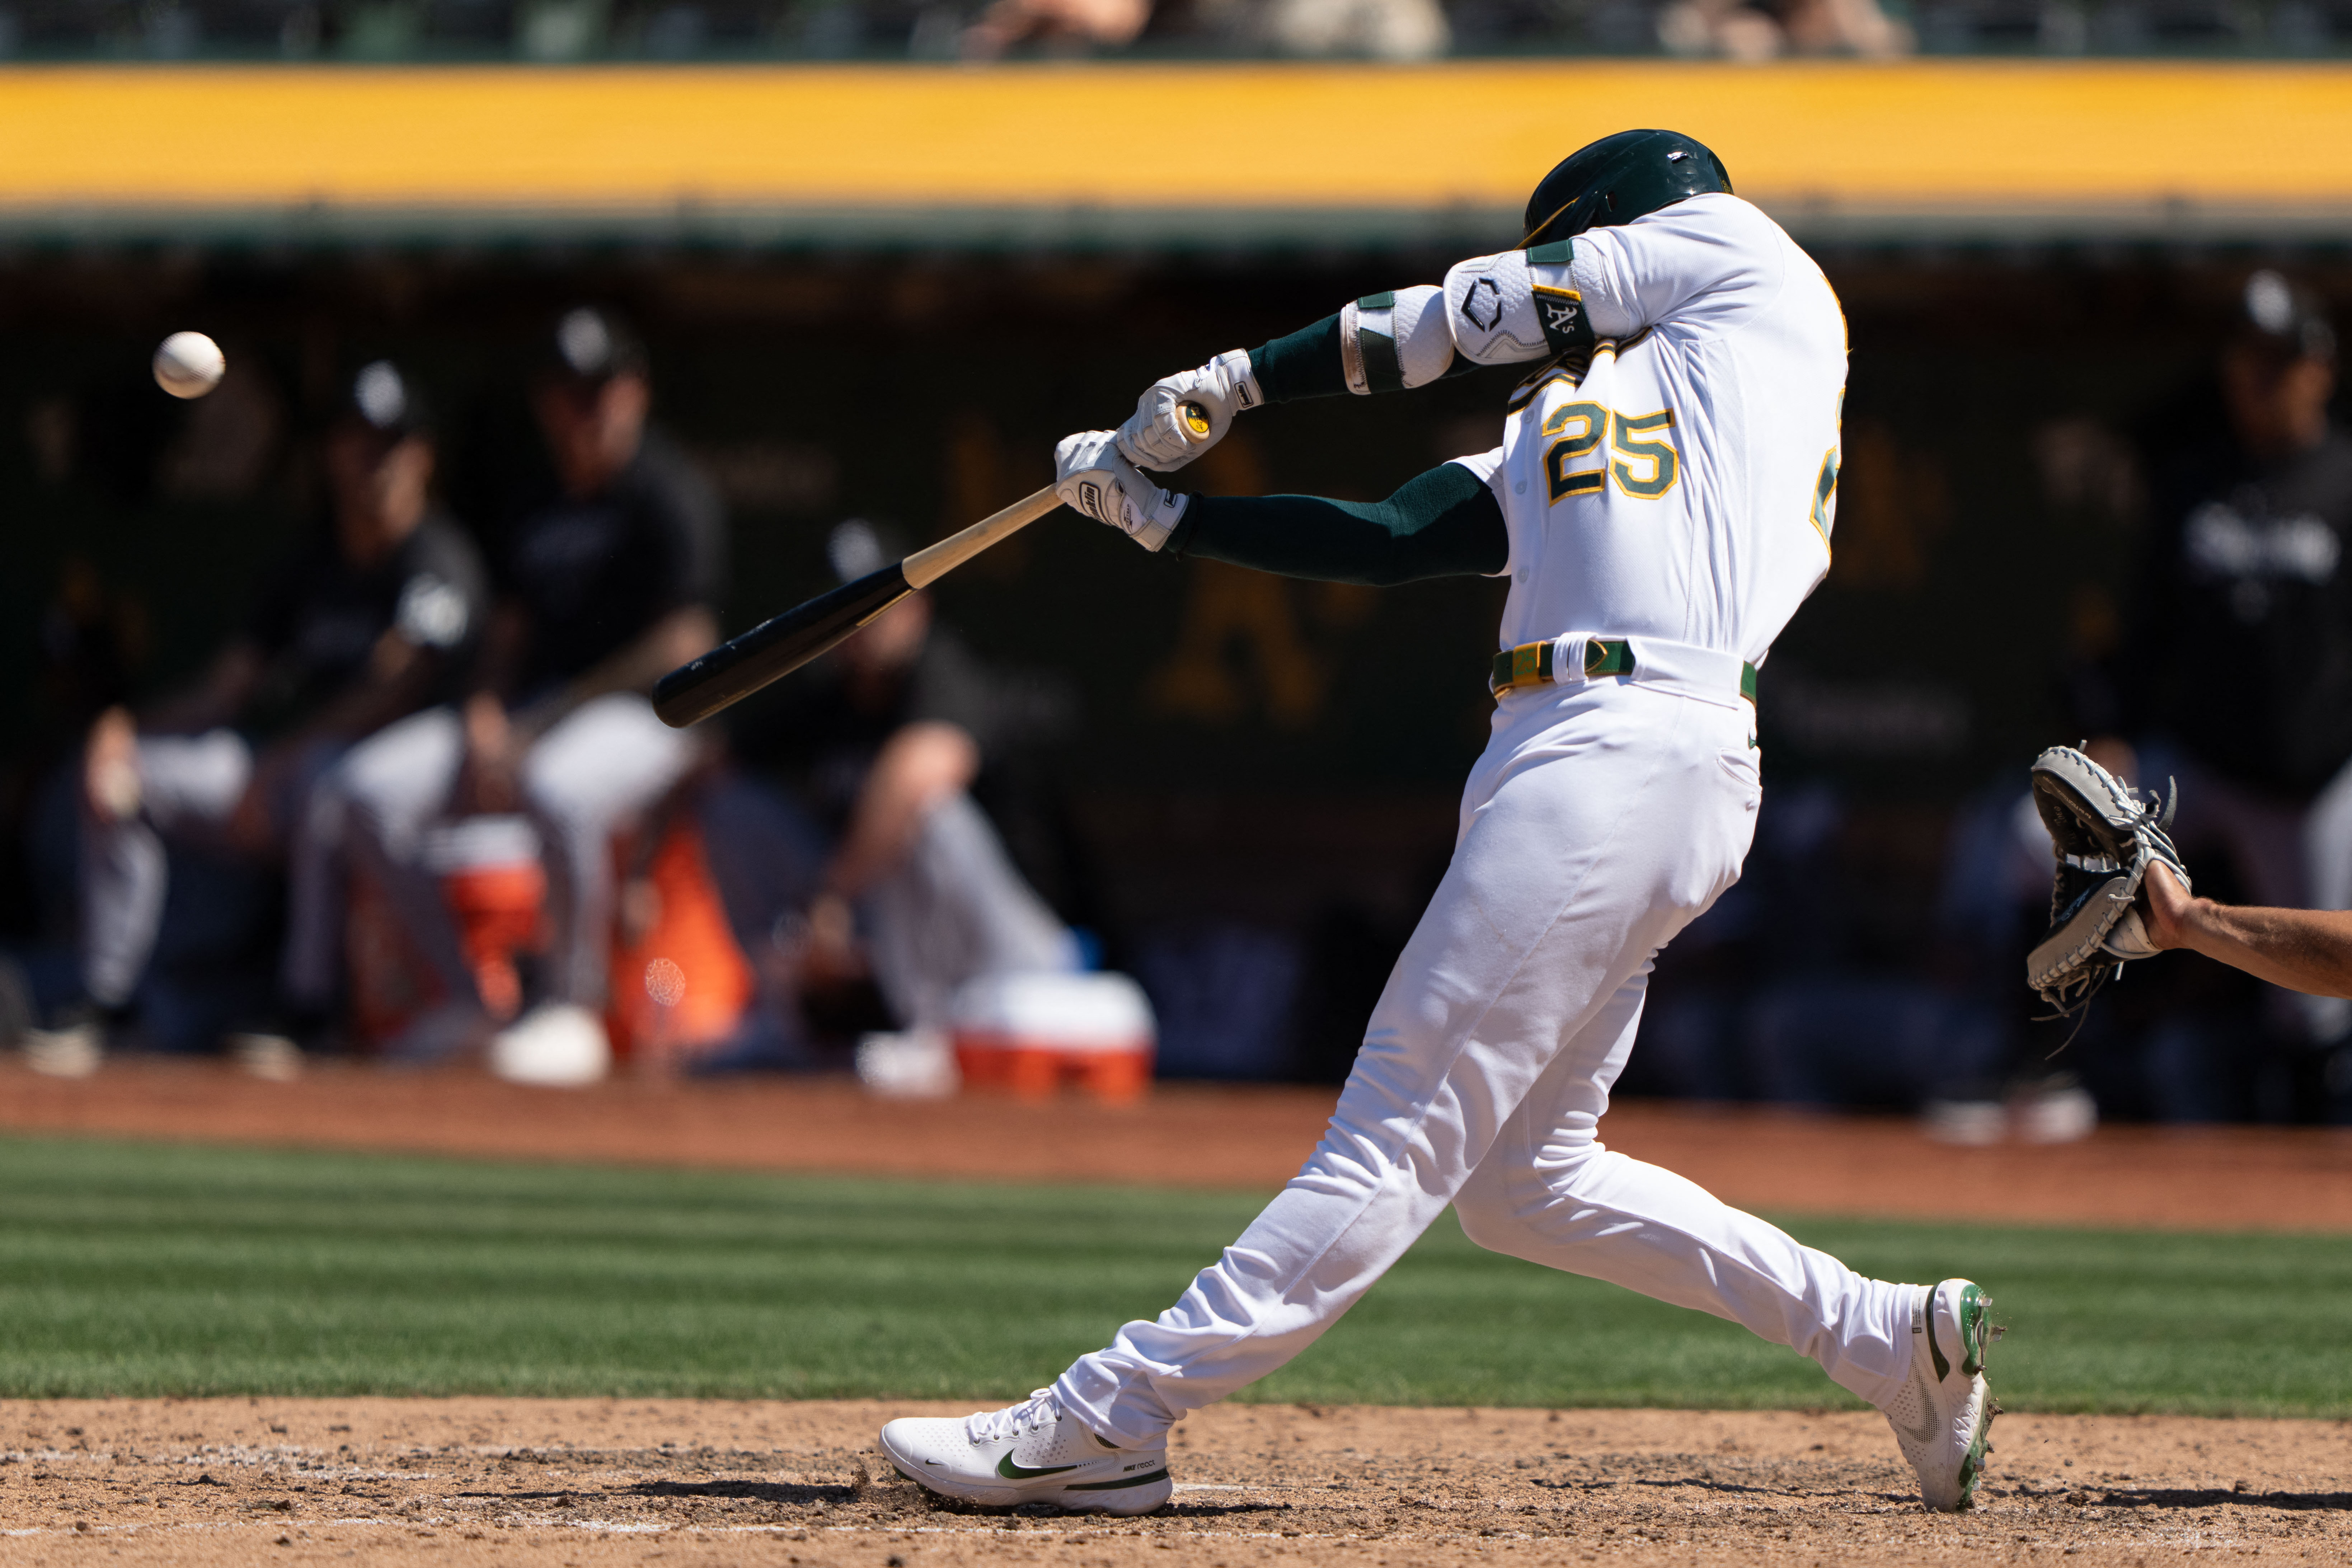 Jake Burger homers, White Sox hold off A's 8-7 to avoid a sweep